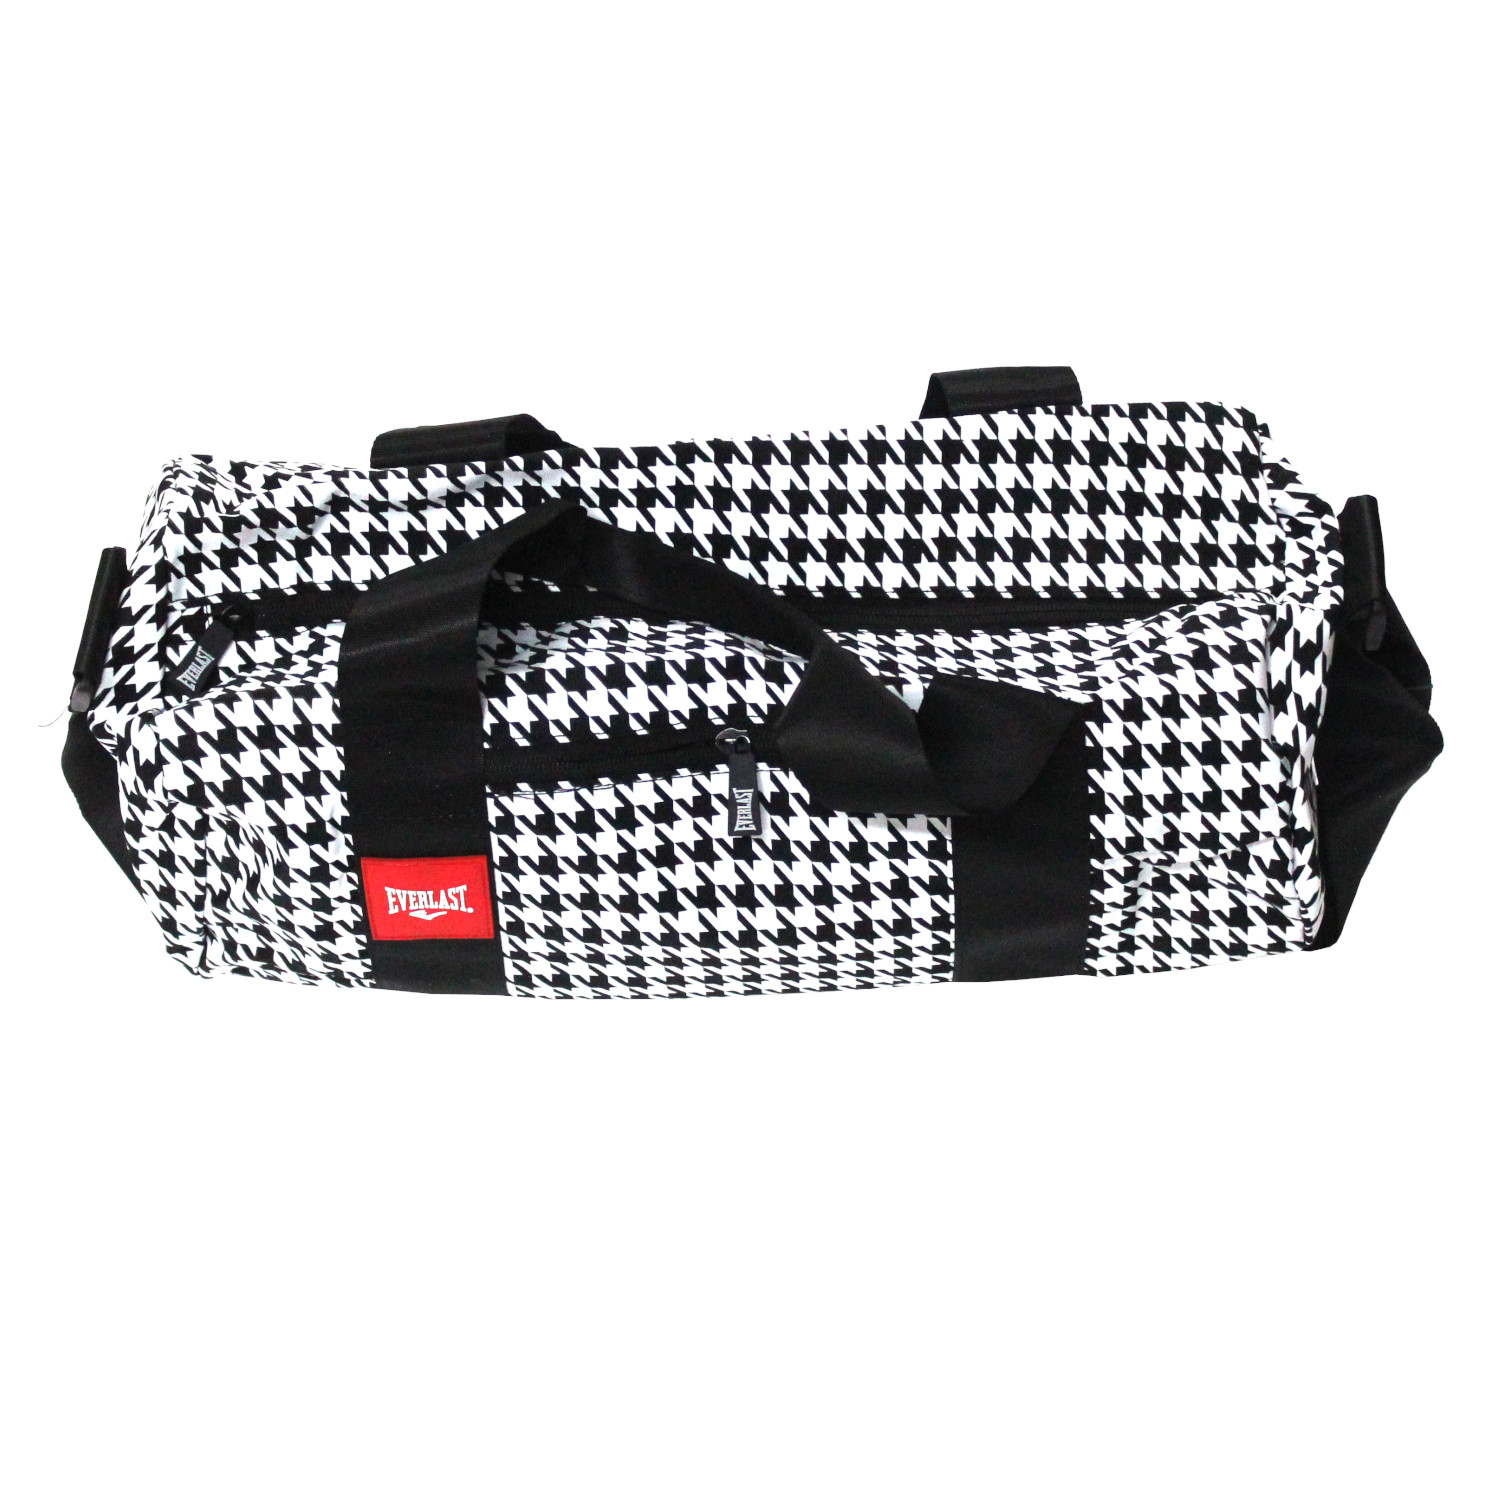 Bulto  Houndstooth Wh/Bk